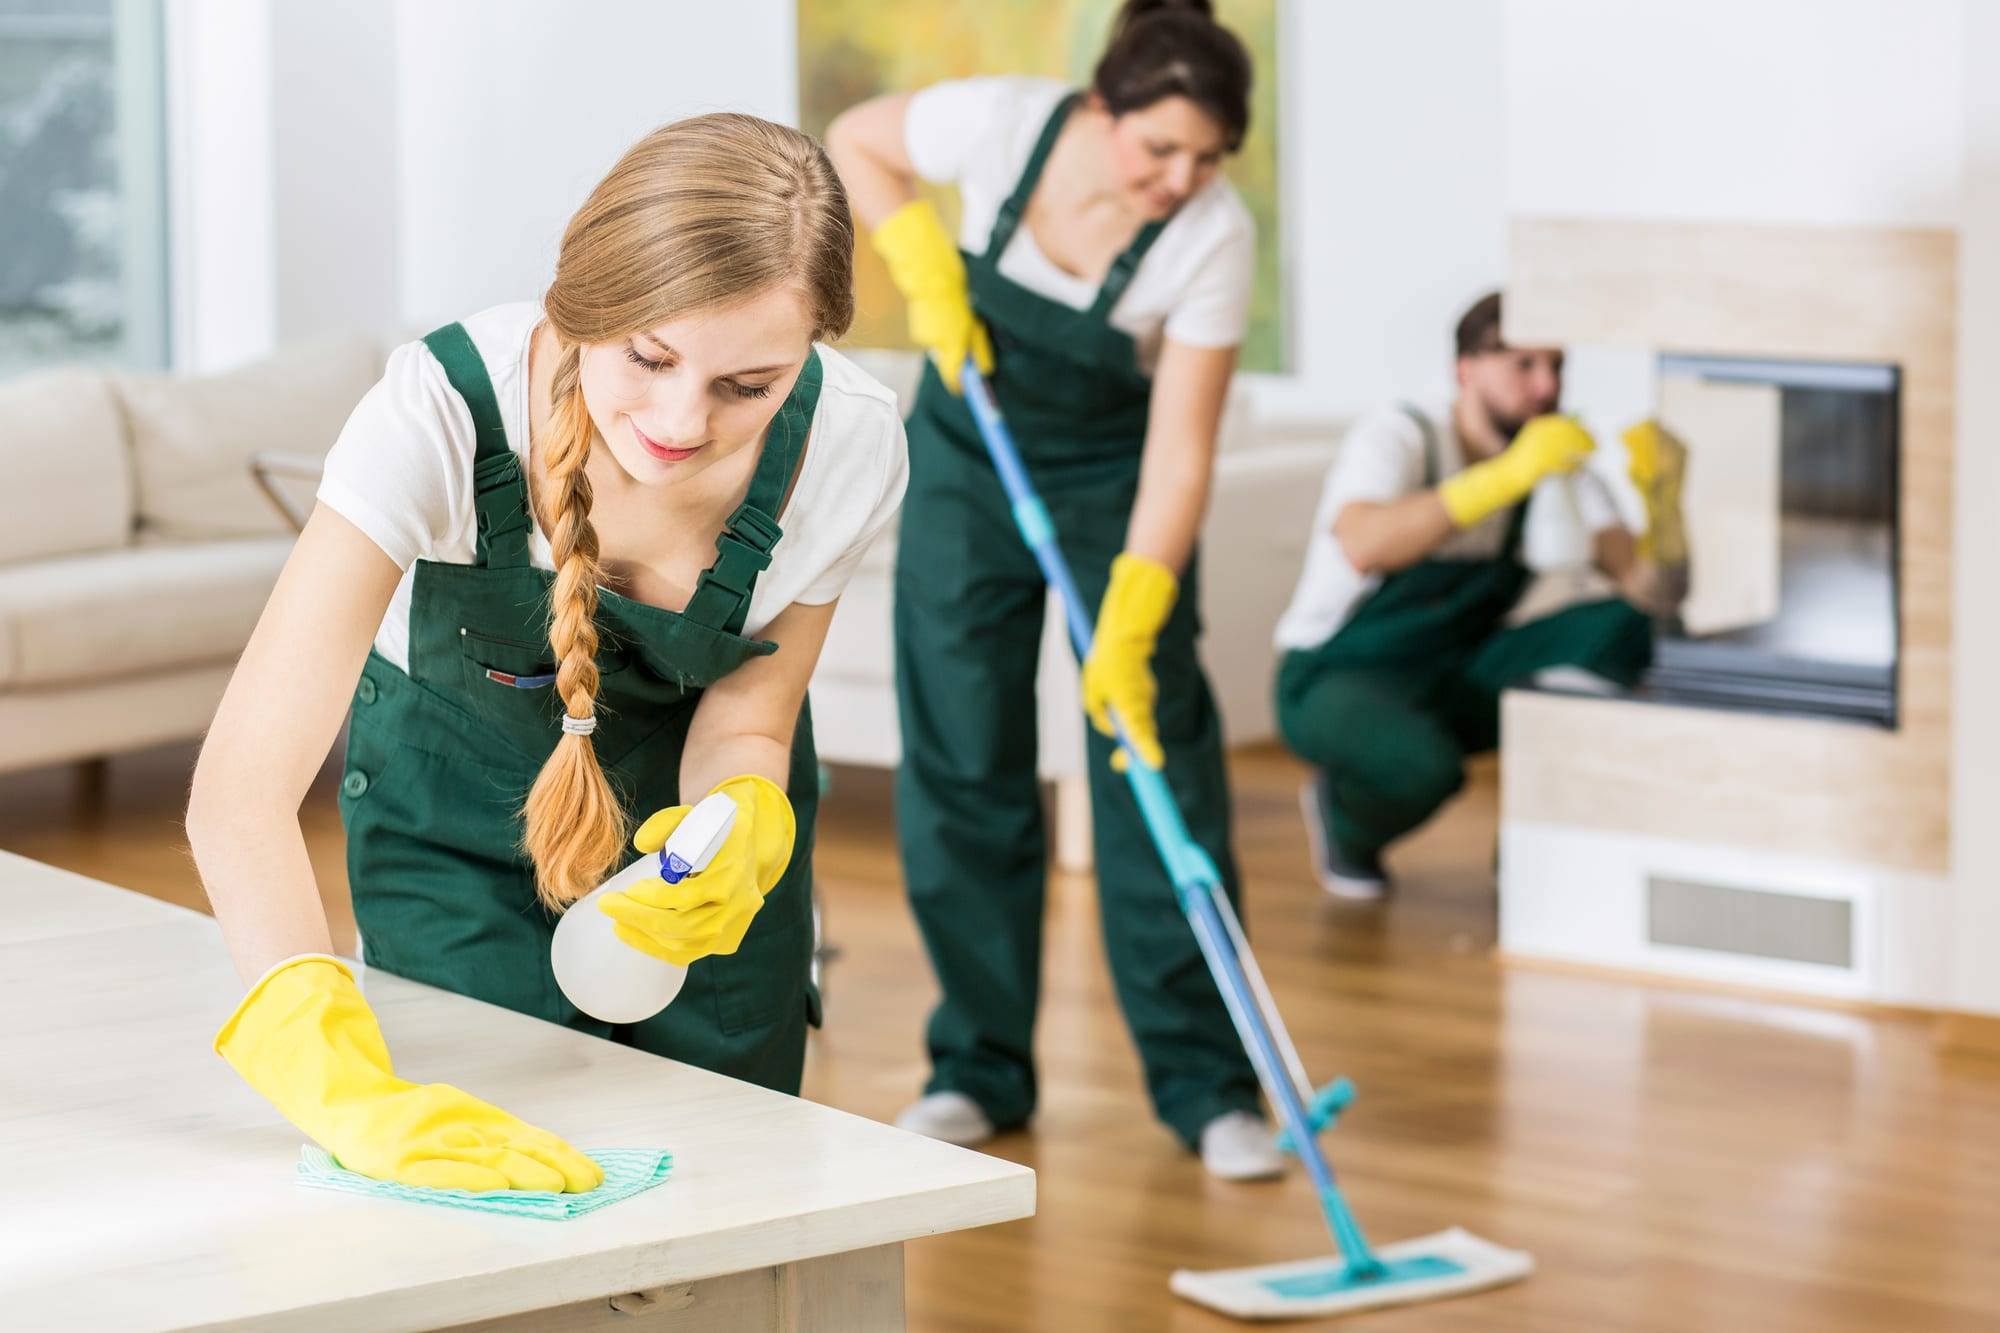 9 Signs You Should Hire a Professional Cleaning Service